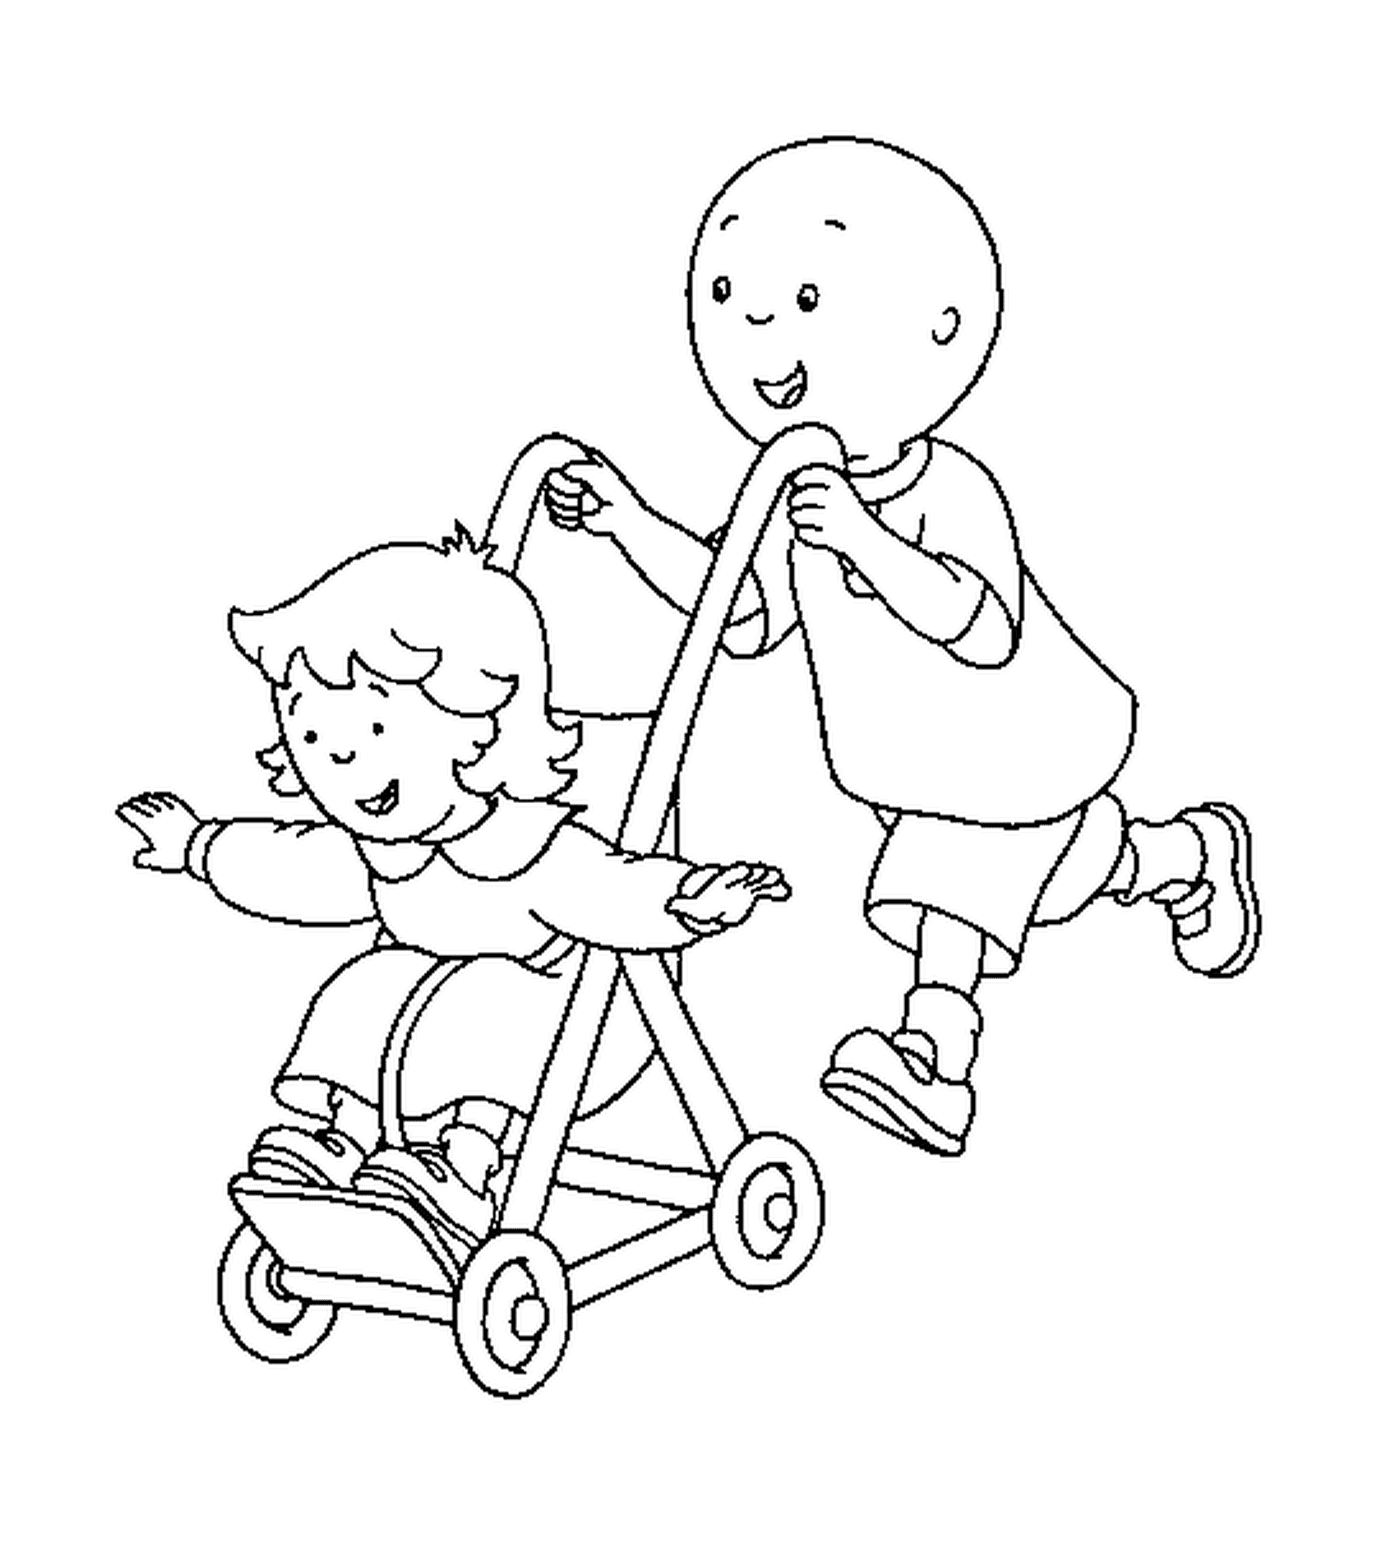  Caillou and Moussline laugh and play together 